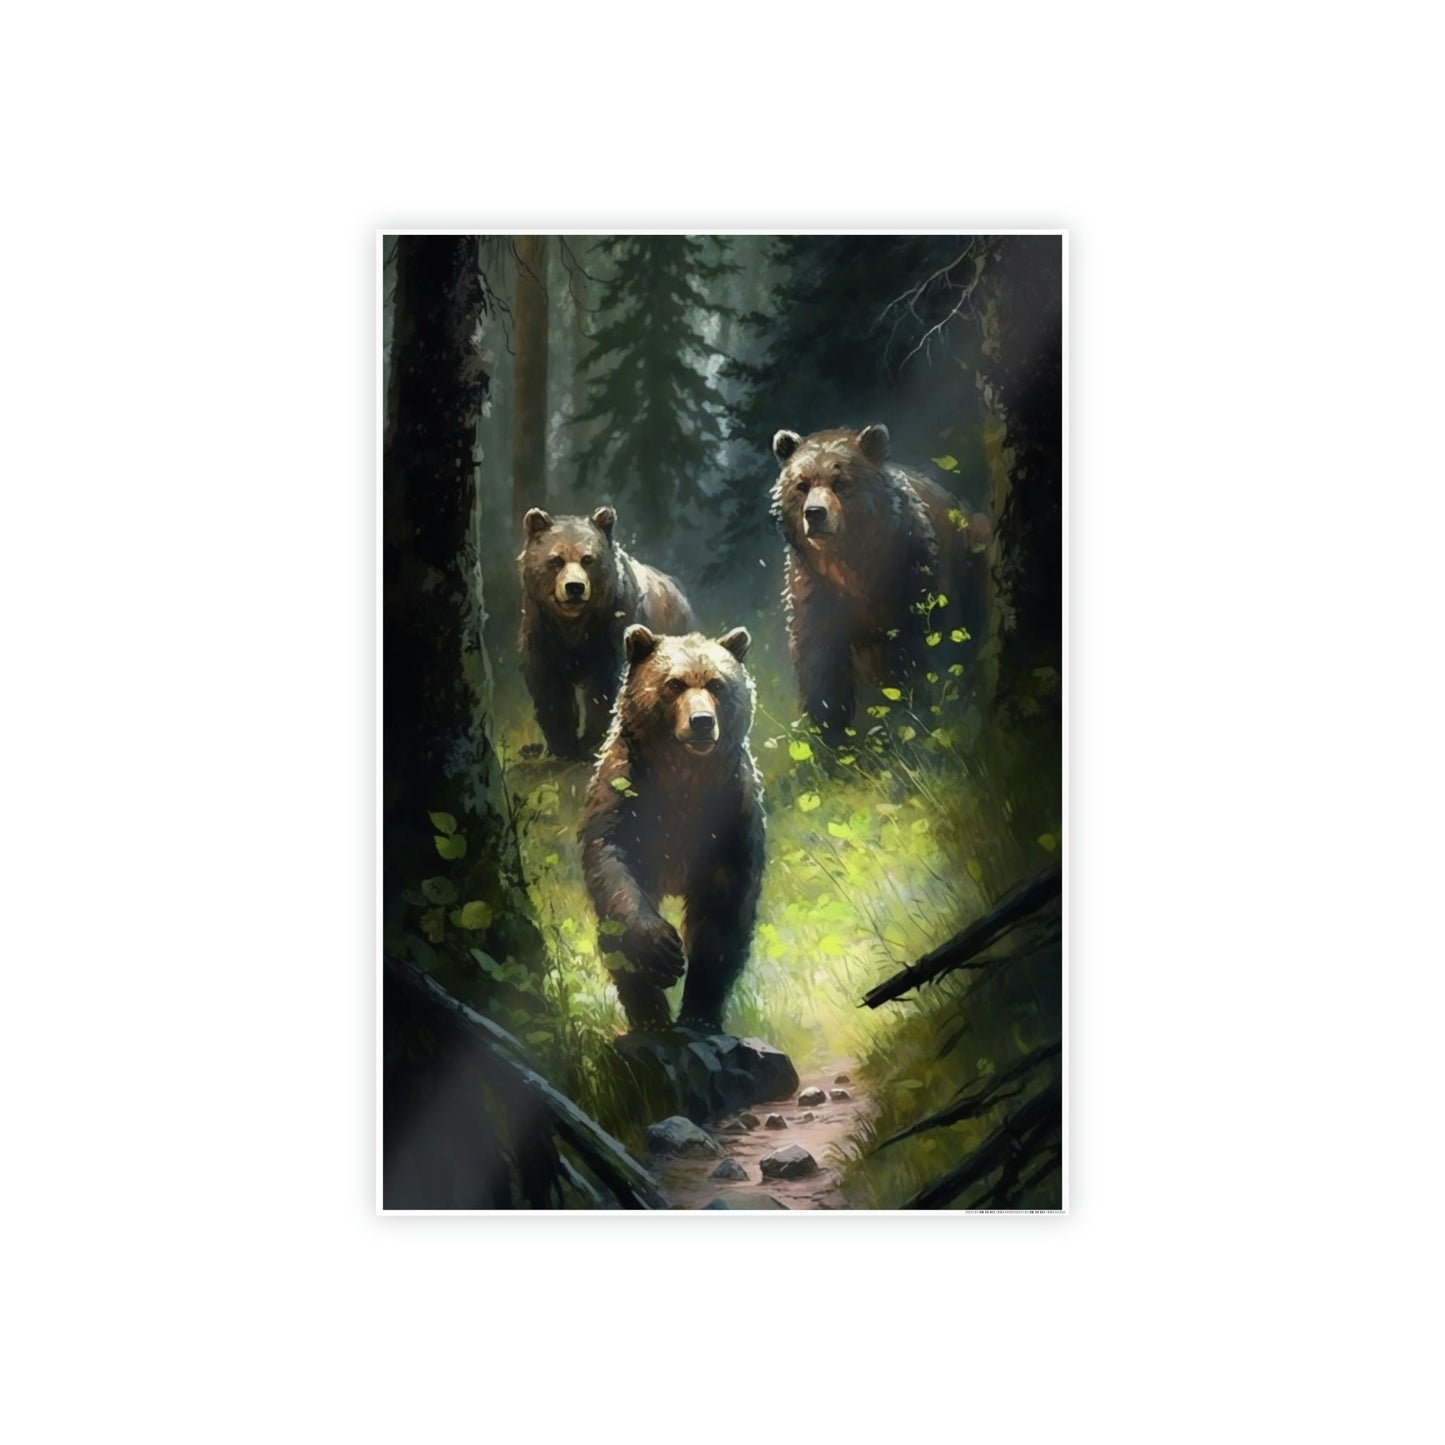 Bear Adventure: Framed Canvas & Poster Print of Curious Grizzly Bears